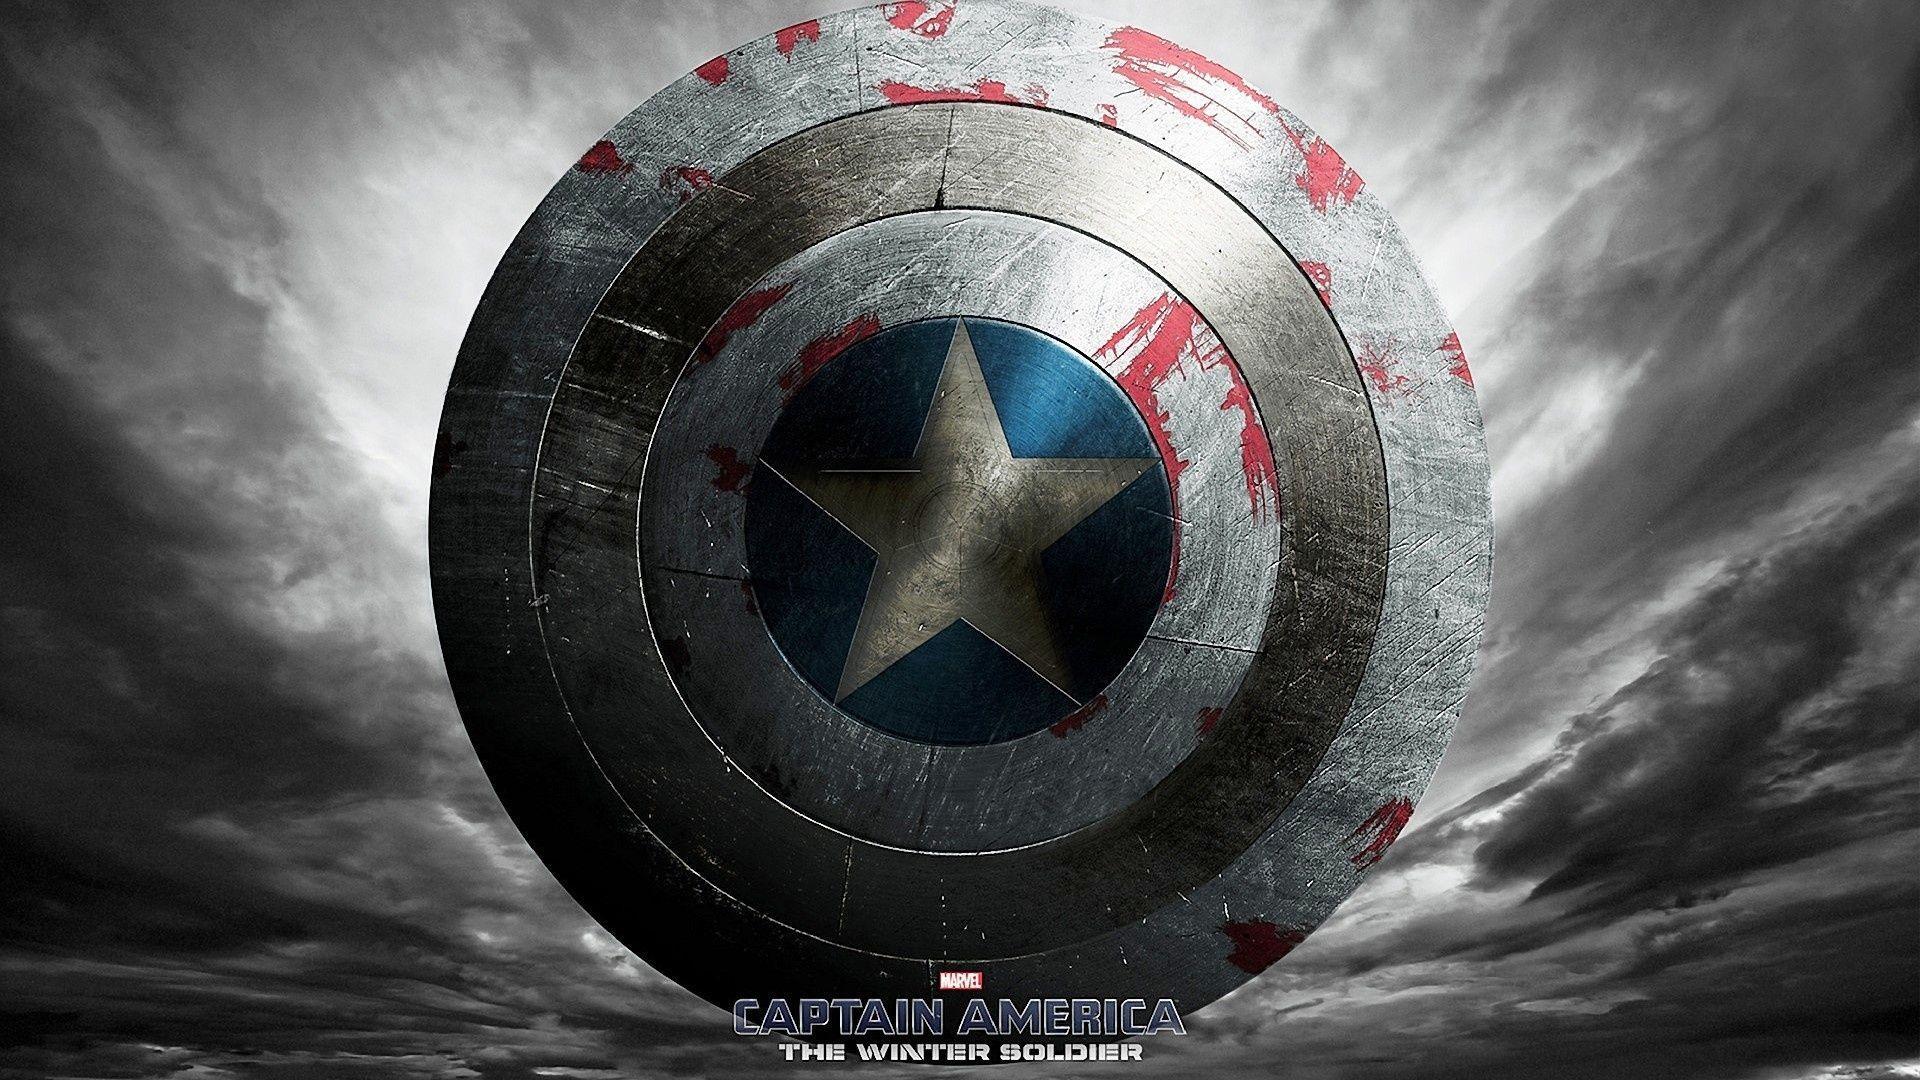 Captain America Hd wallpaper by bugbytes  Download on ZEDGE  5628